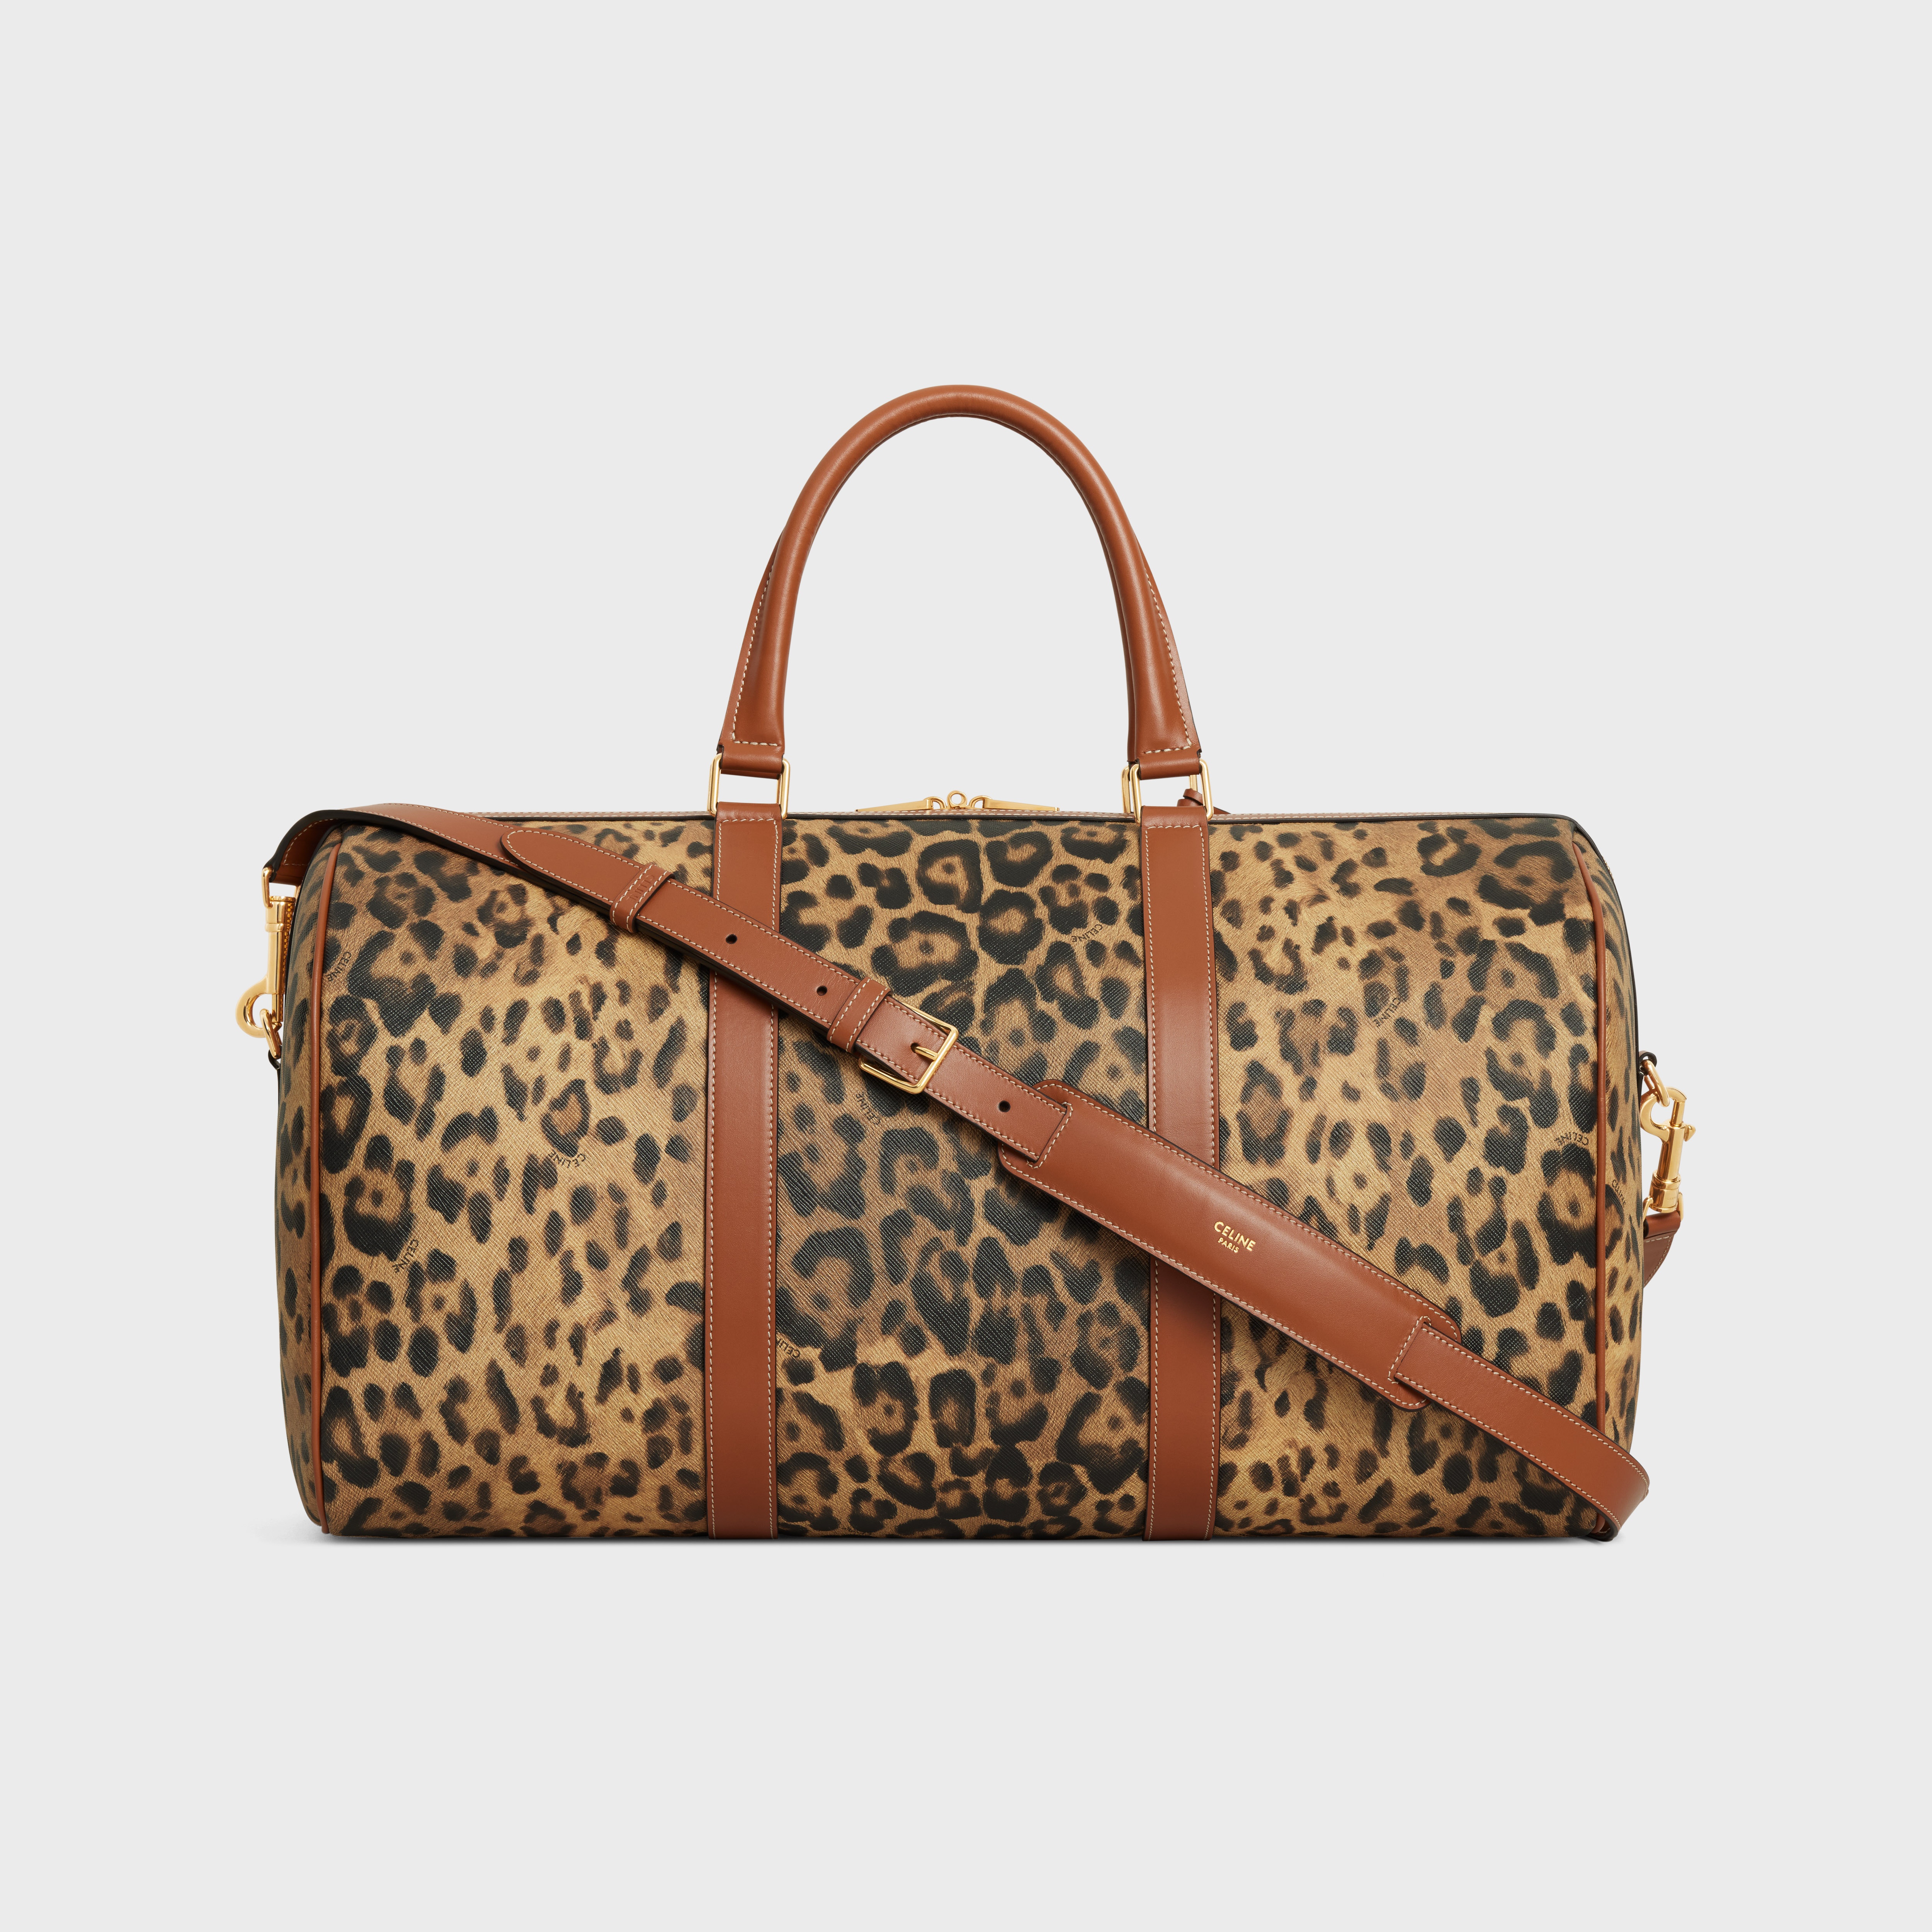 Medium Travel Bag in Celine canvas with leopard print - 3